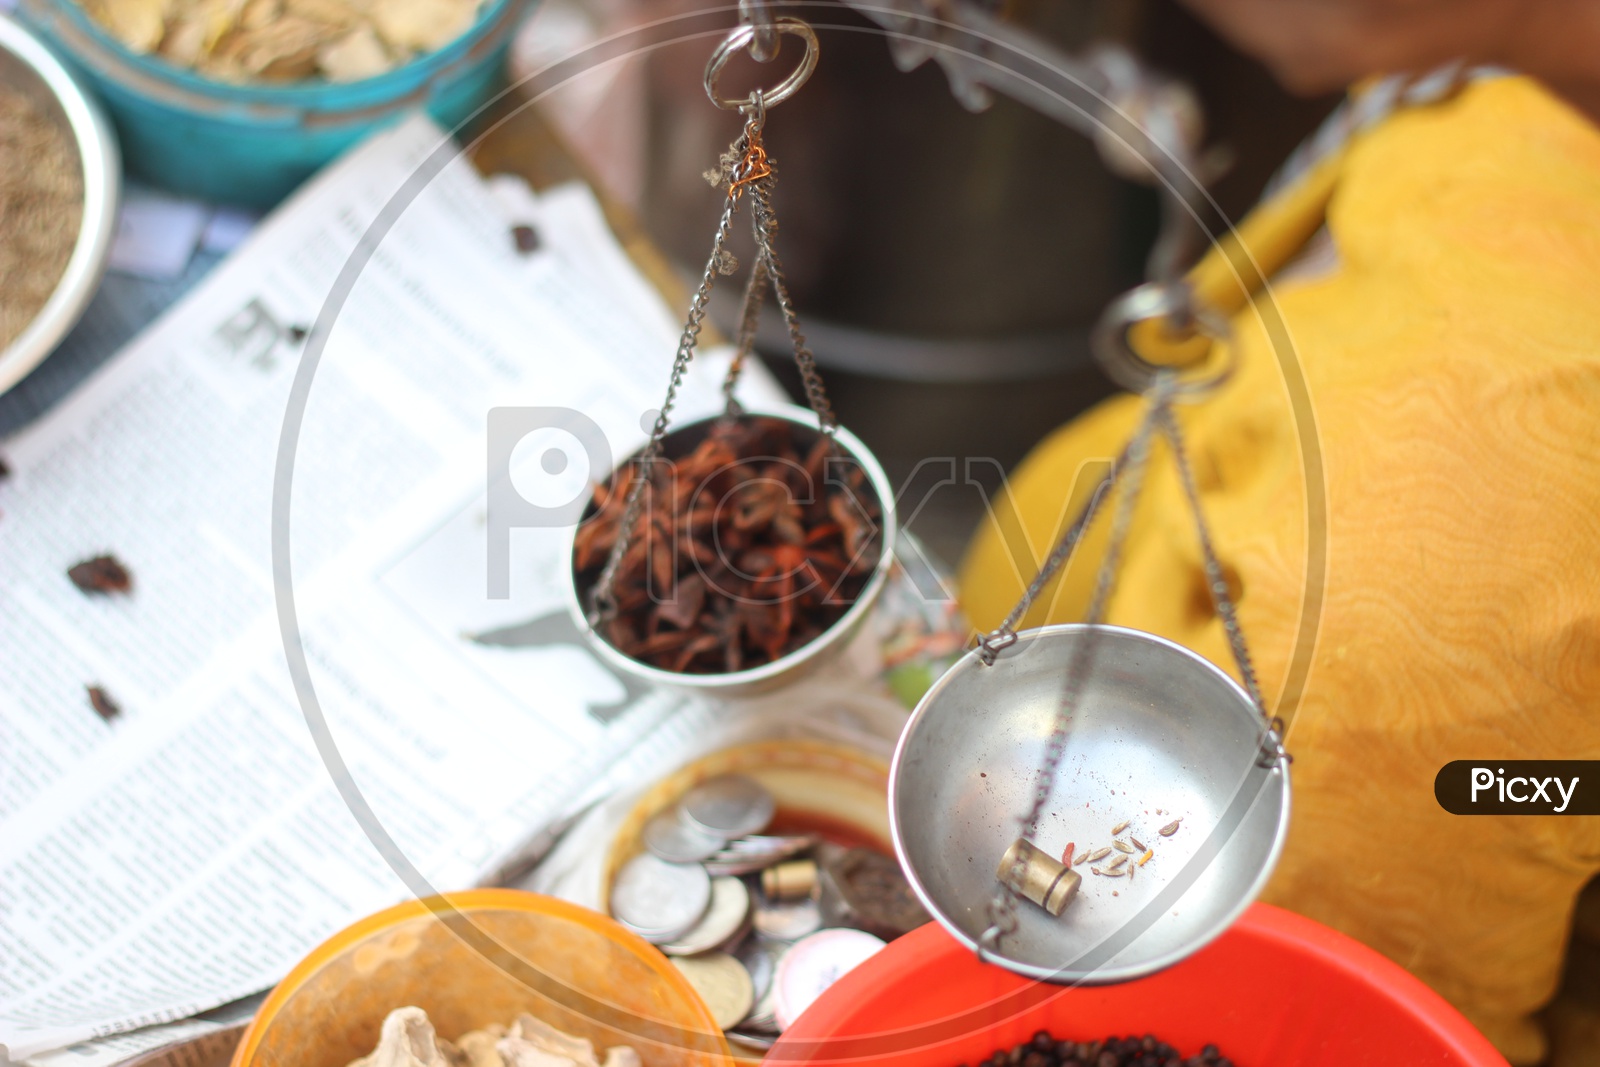 Star anise is weighed in a small weighing scale - Indian Spices